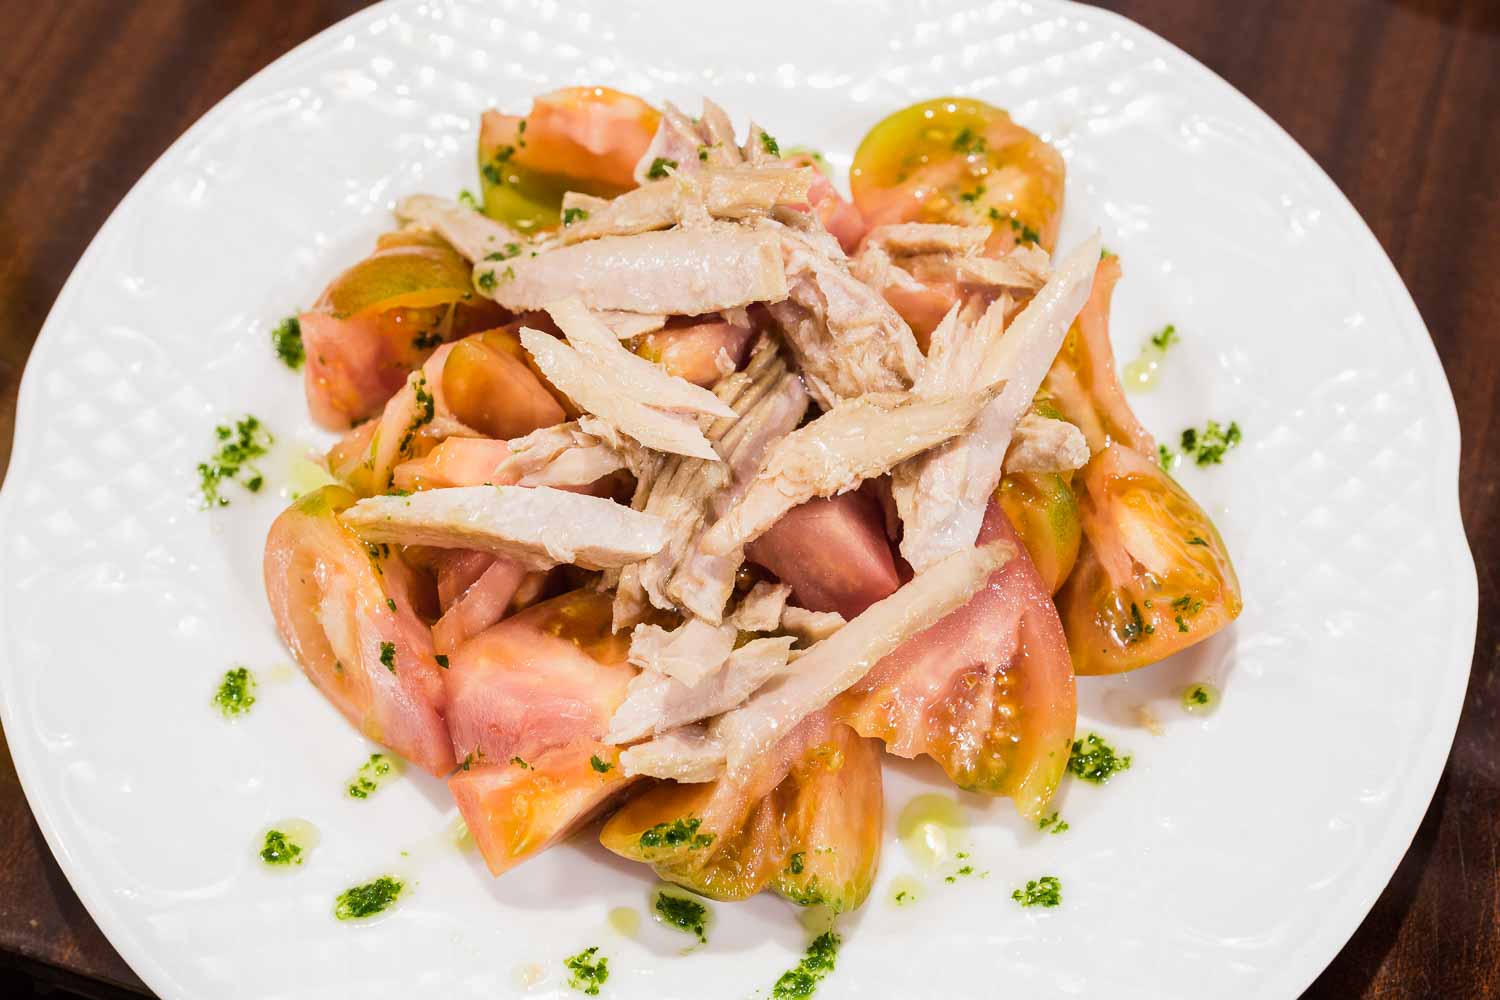 Tomato salad with tuna belly